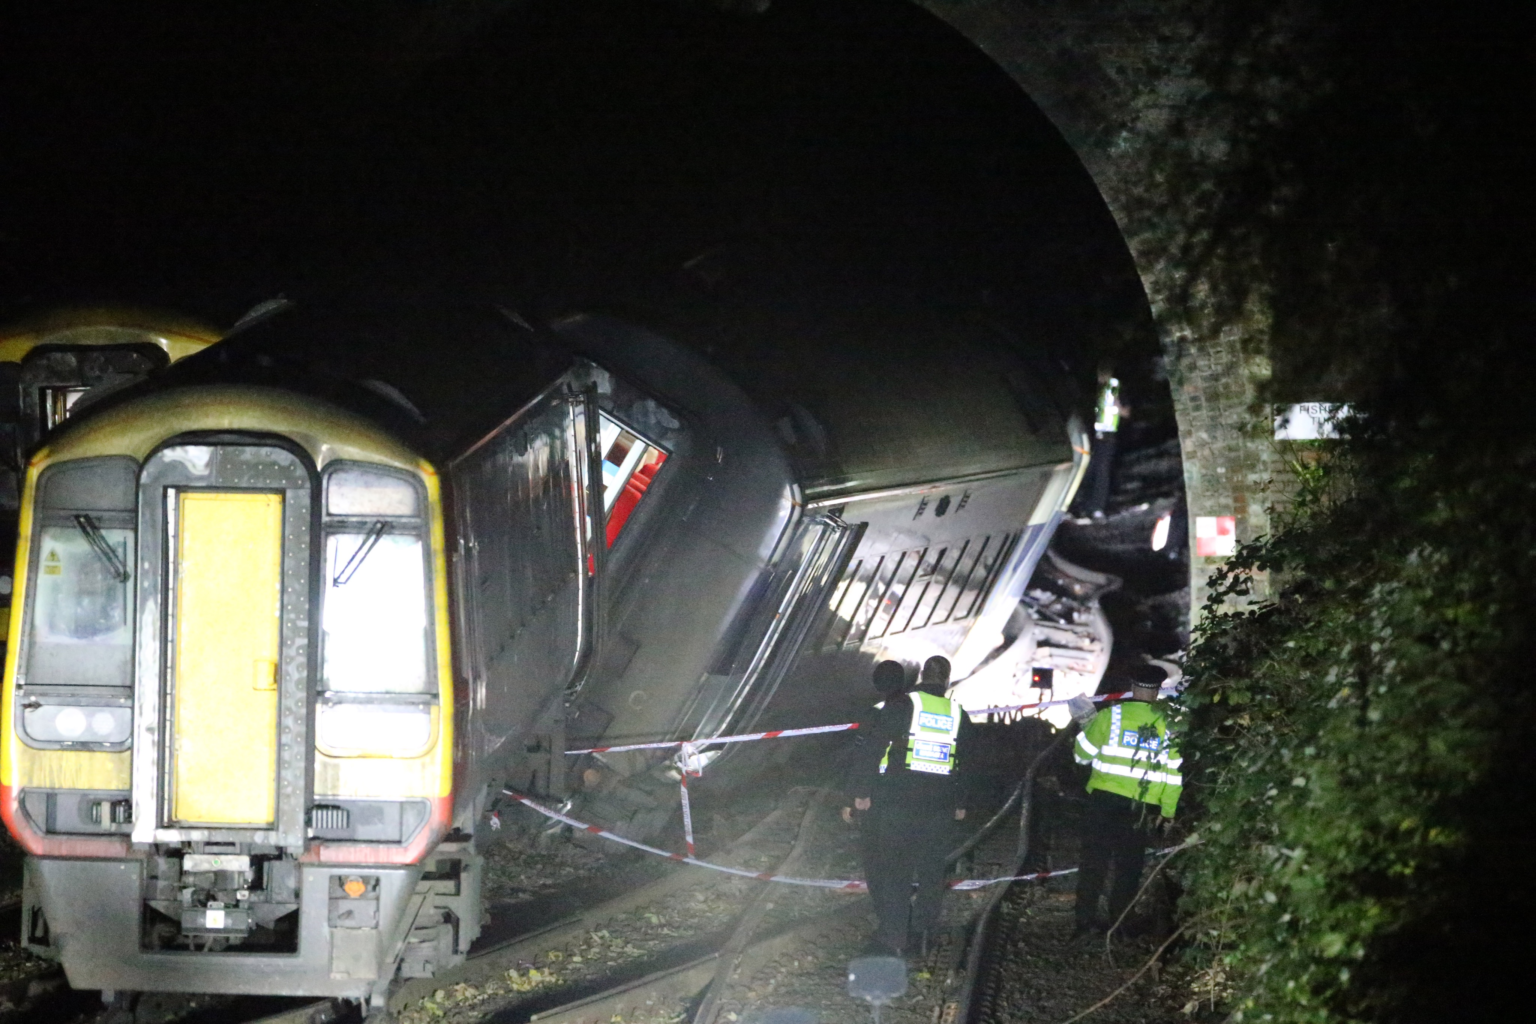 Salisbury train crash: Latest news from the Wiltshire where two trains collide